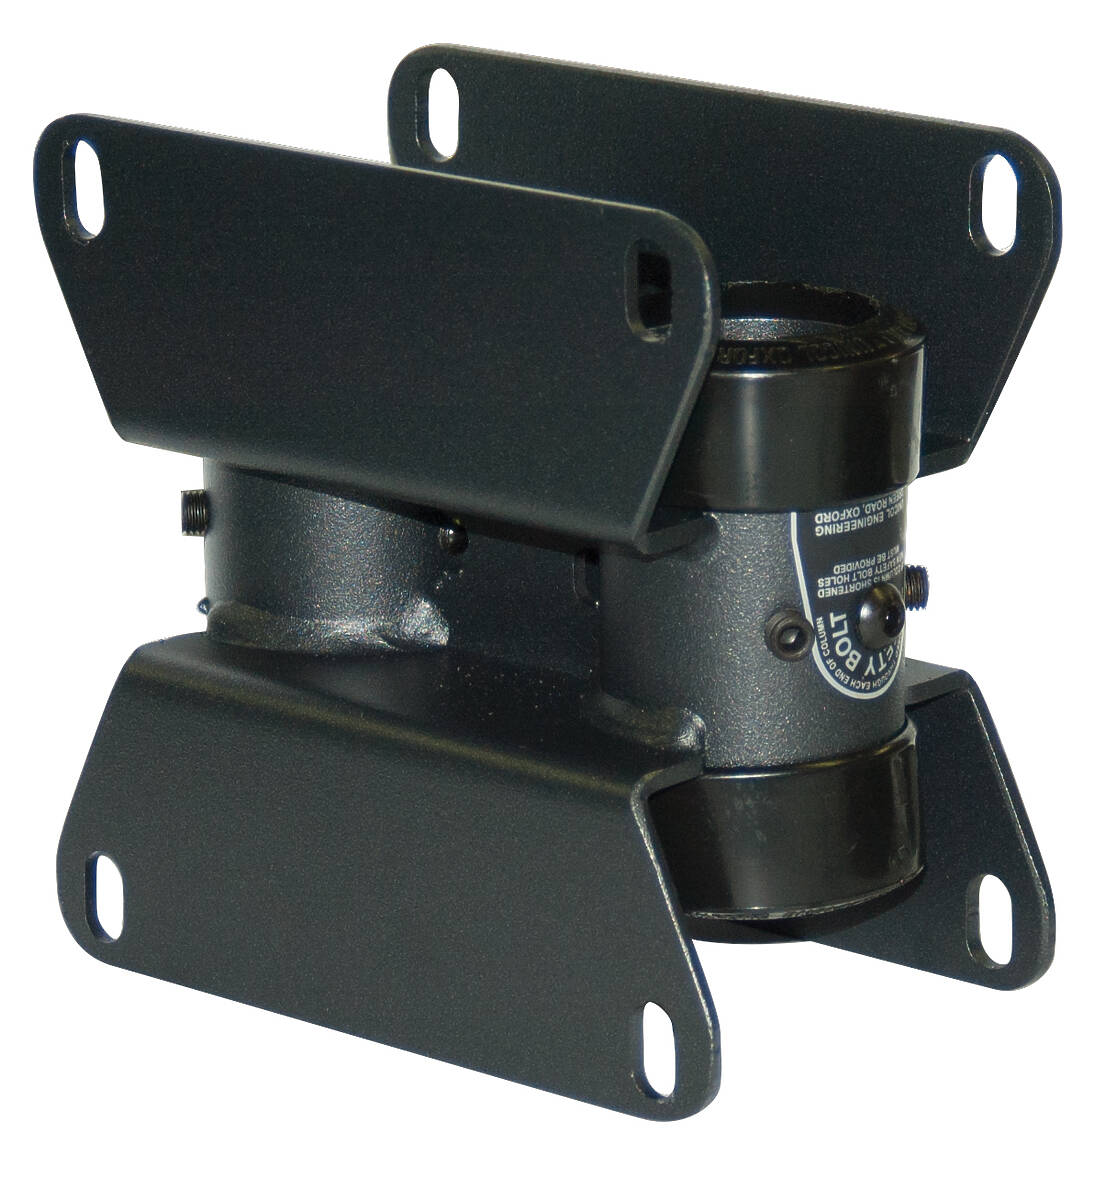 Unicol PS8 Convert Pozimount/Xactmatch mounts to fit twin columns; for two mounts back-to-back product image. Click to enlarge.